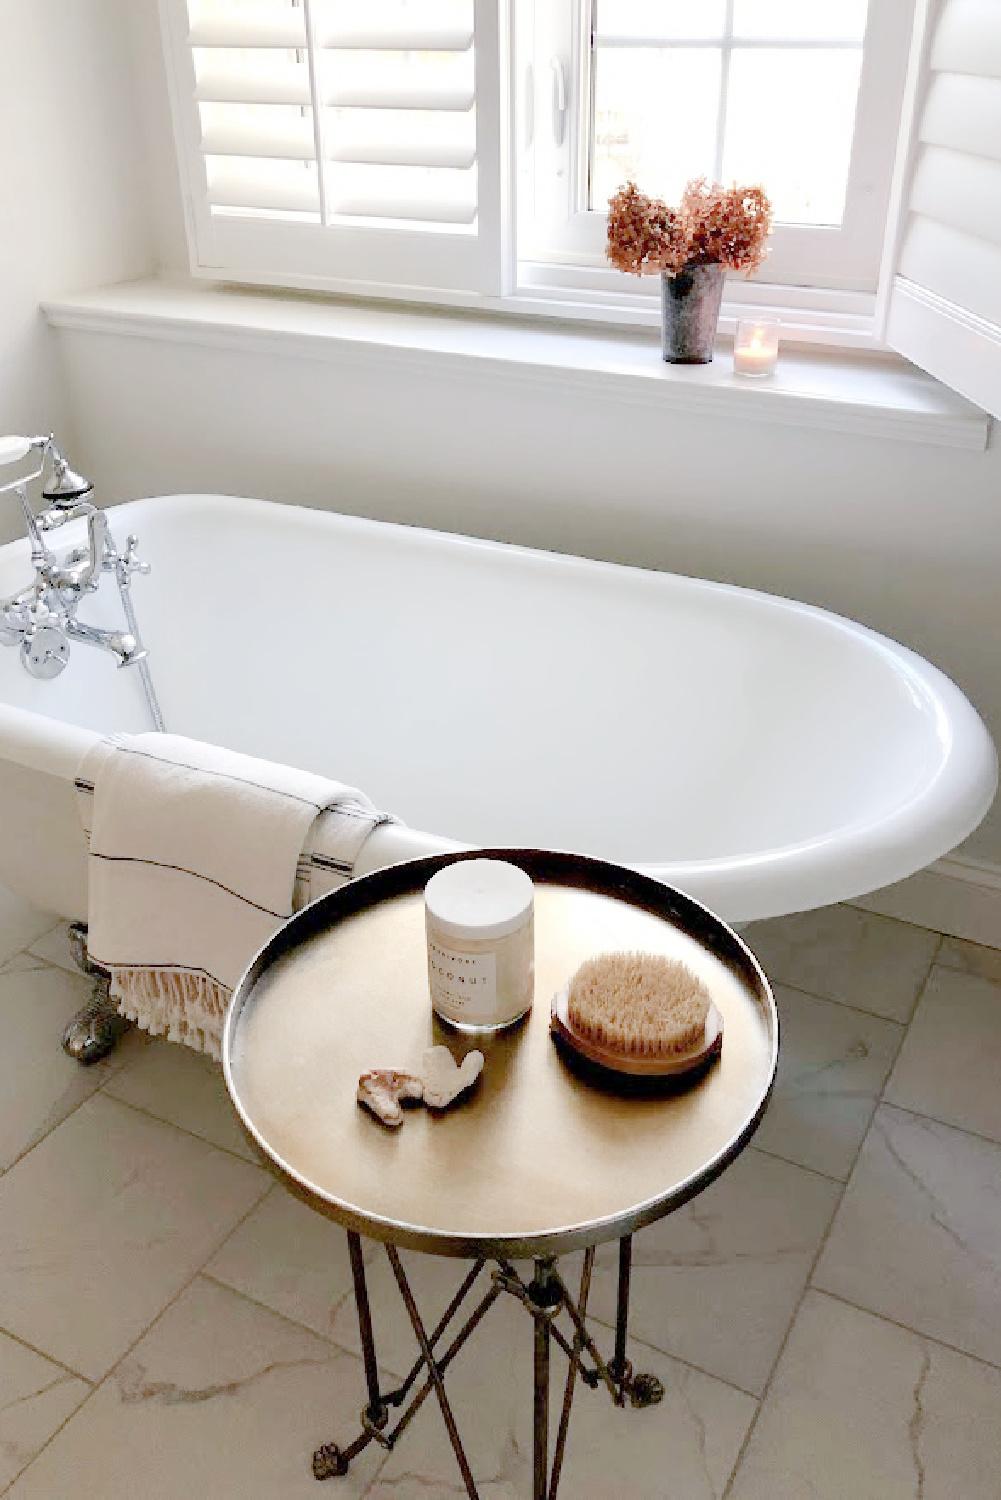 My serene bath with small clawfoot Maid's tub, plantation shutters, and round silver accent table - Hello Lovely Studio. #serenebath #bathroomdesign #minimalluxe